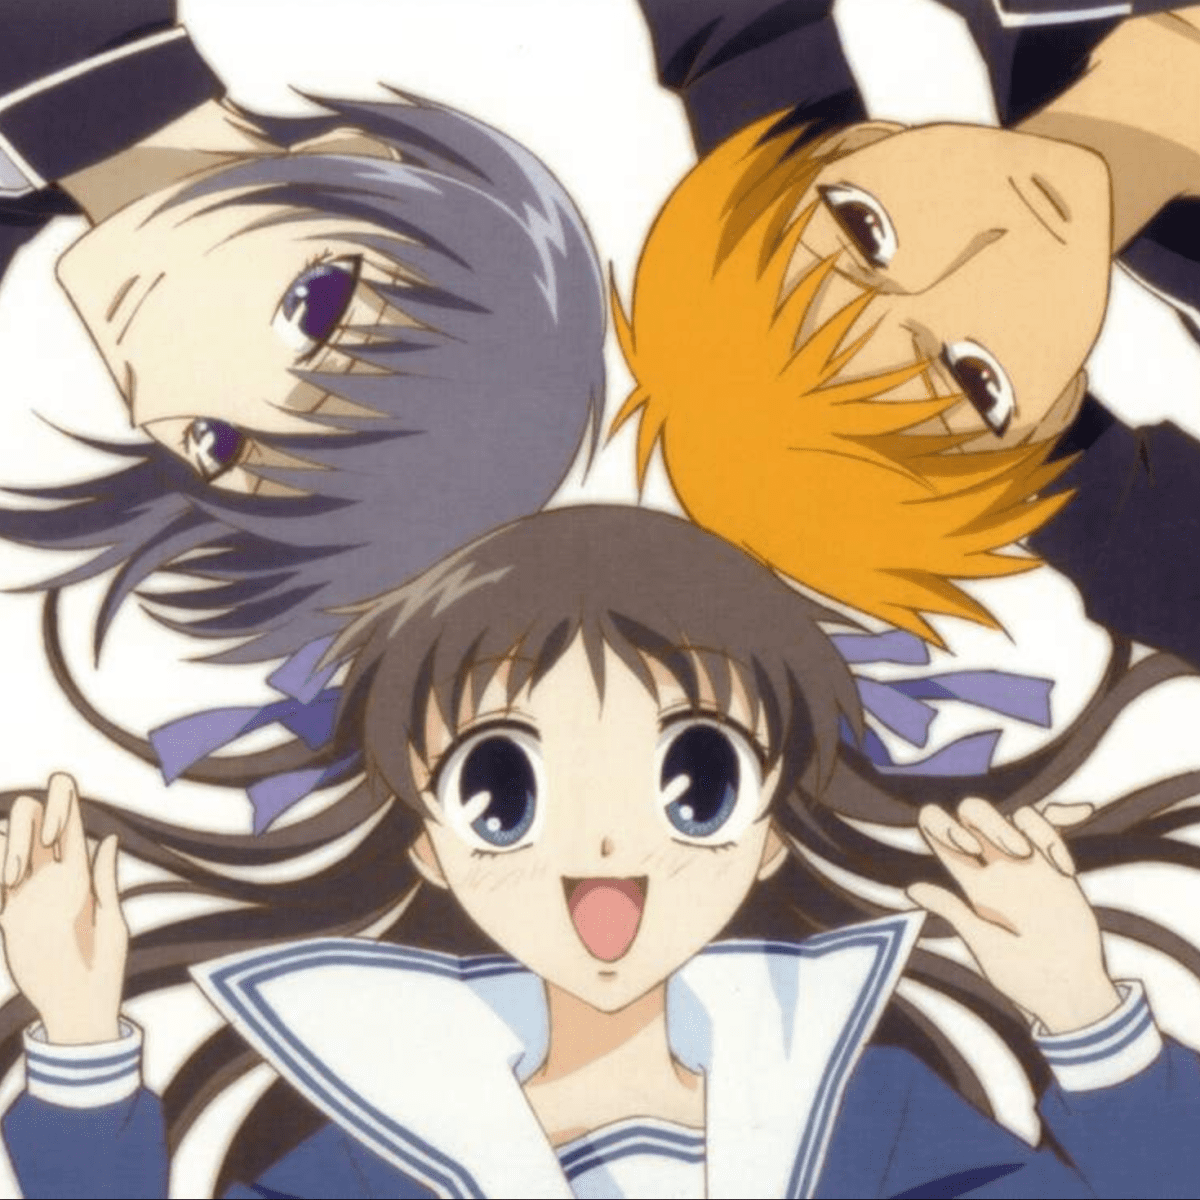 Top 10 Action Shoujo Anime List [Best Recommendations]